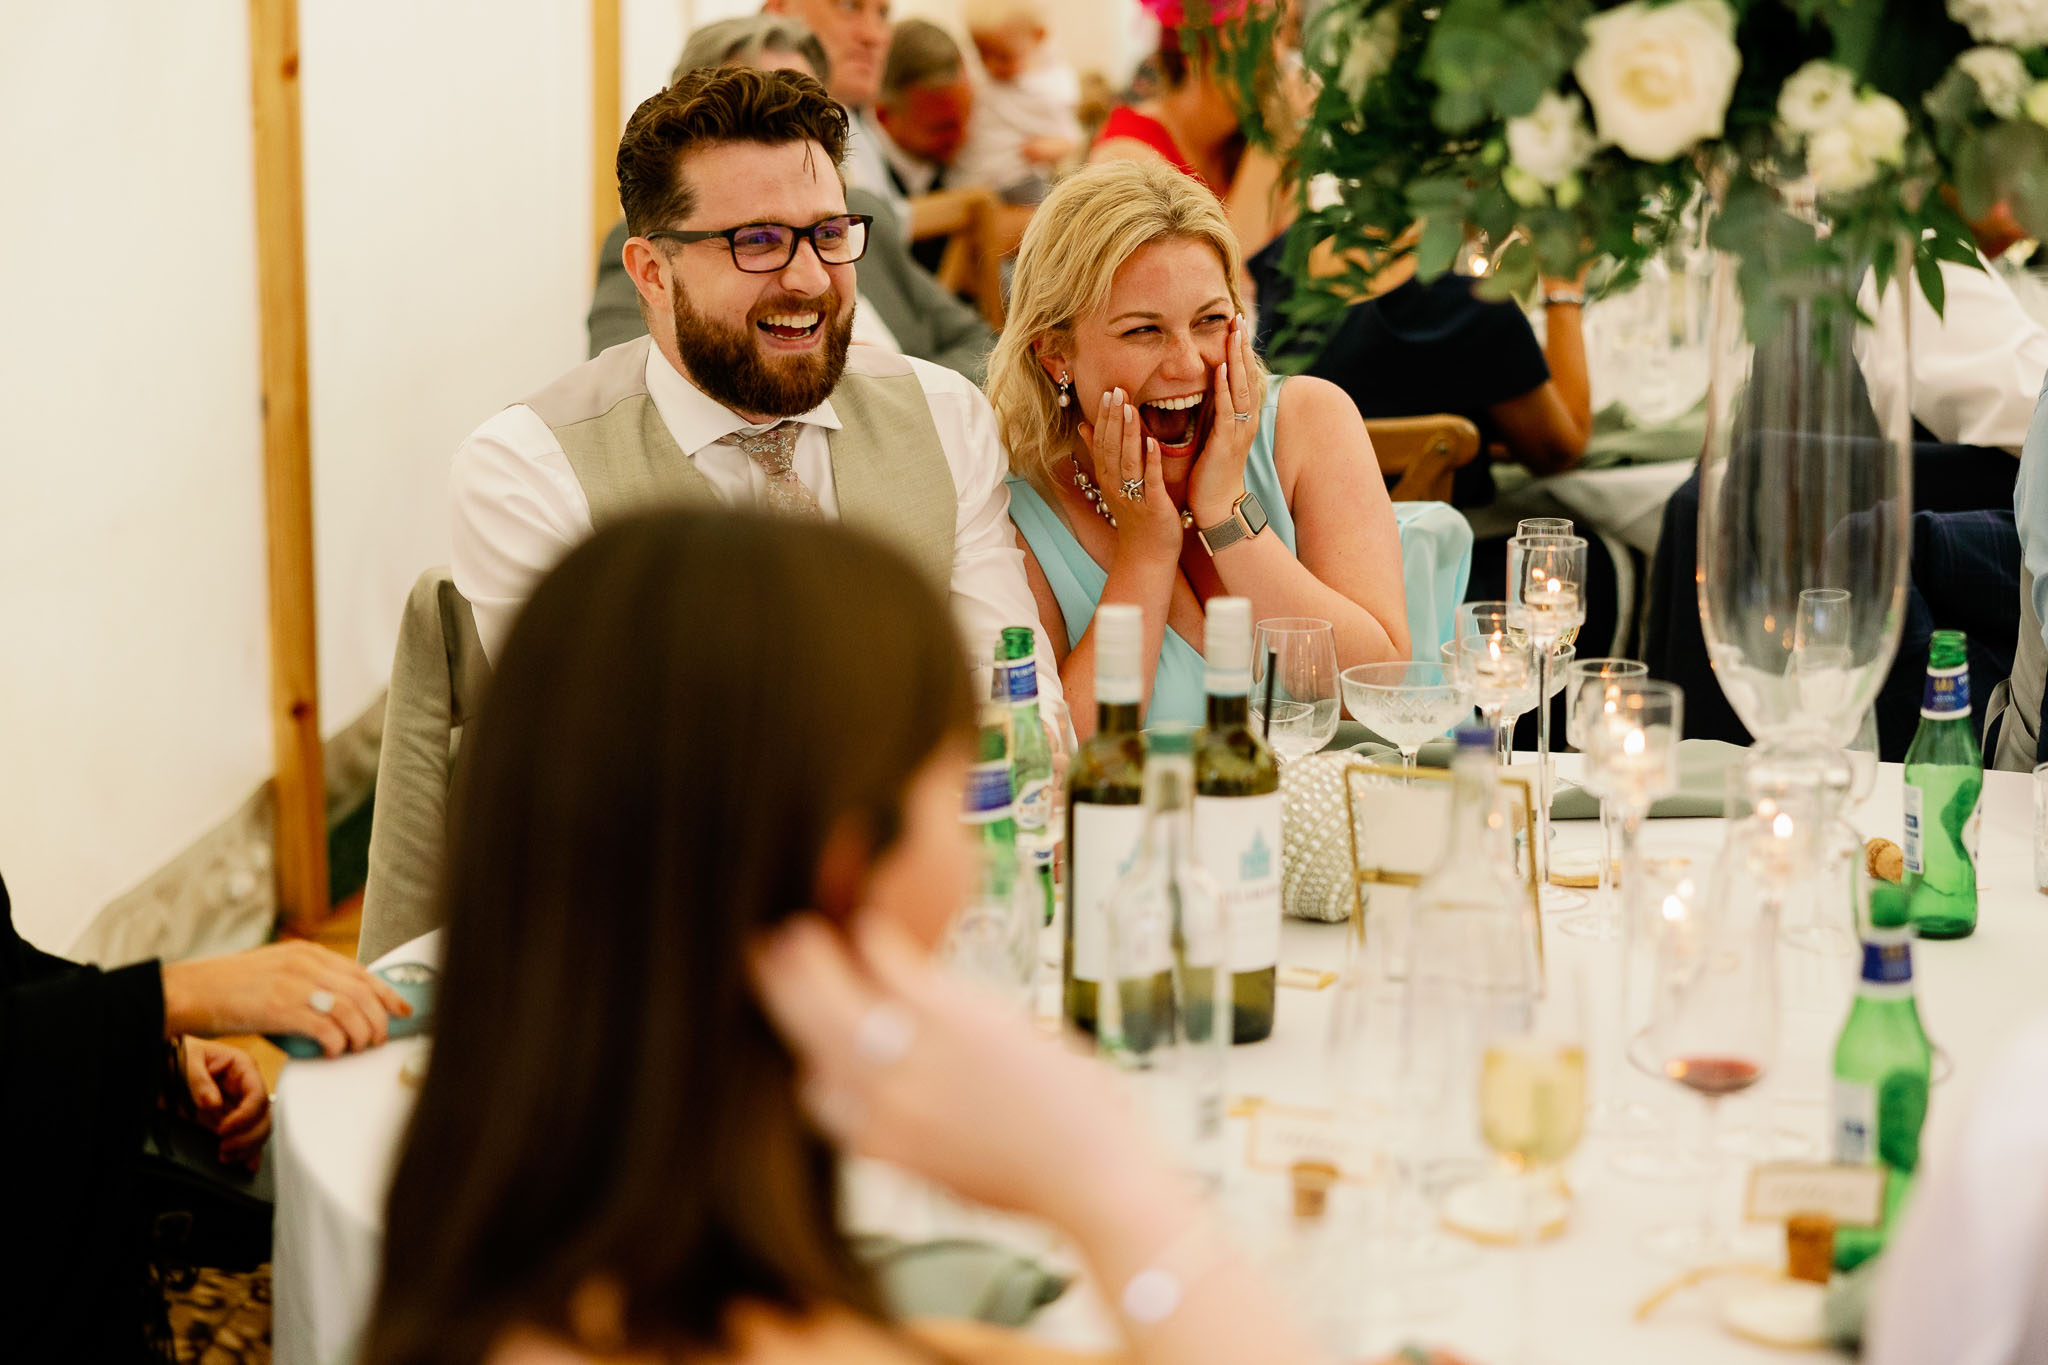 Natural and fun speeches at a wedding